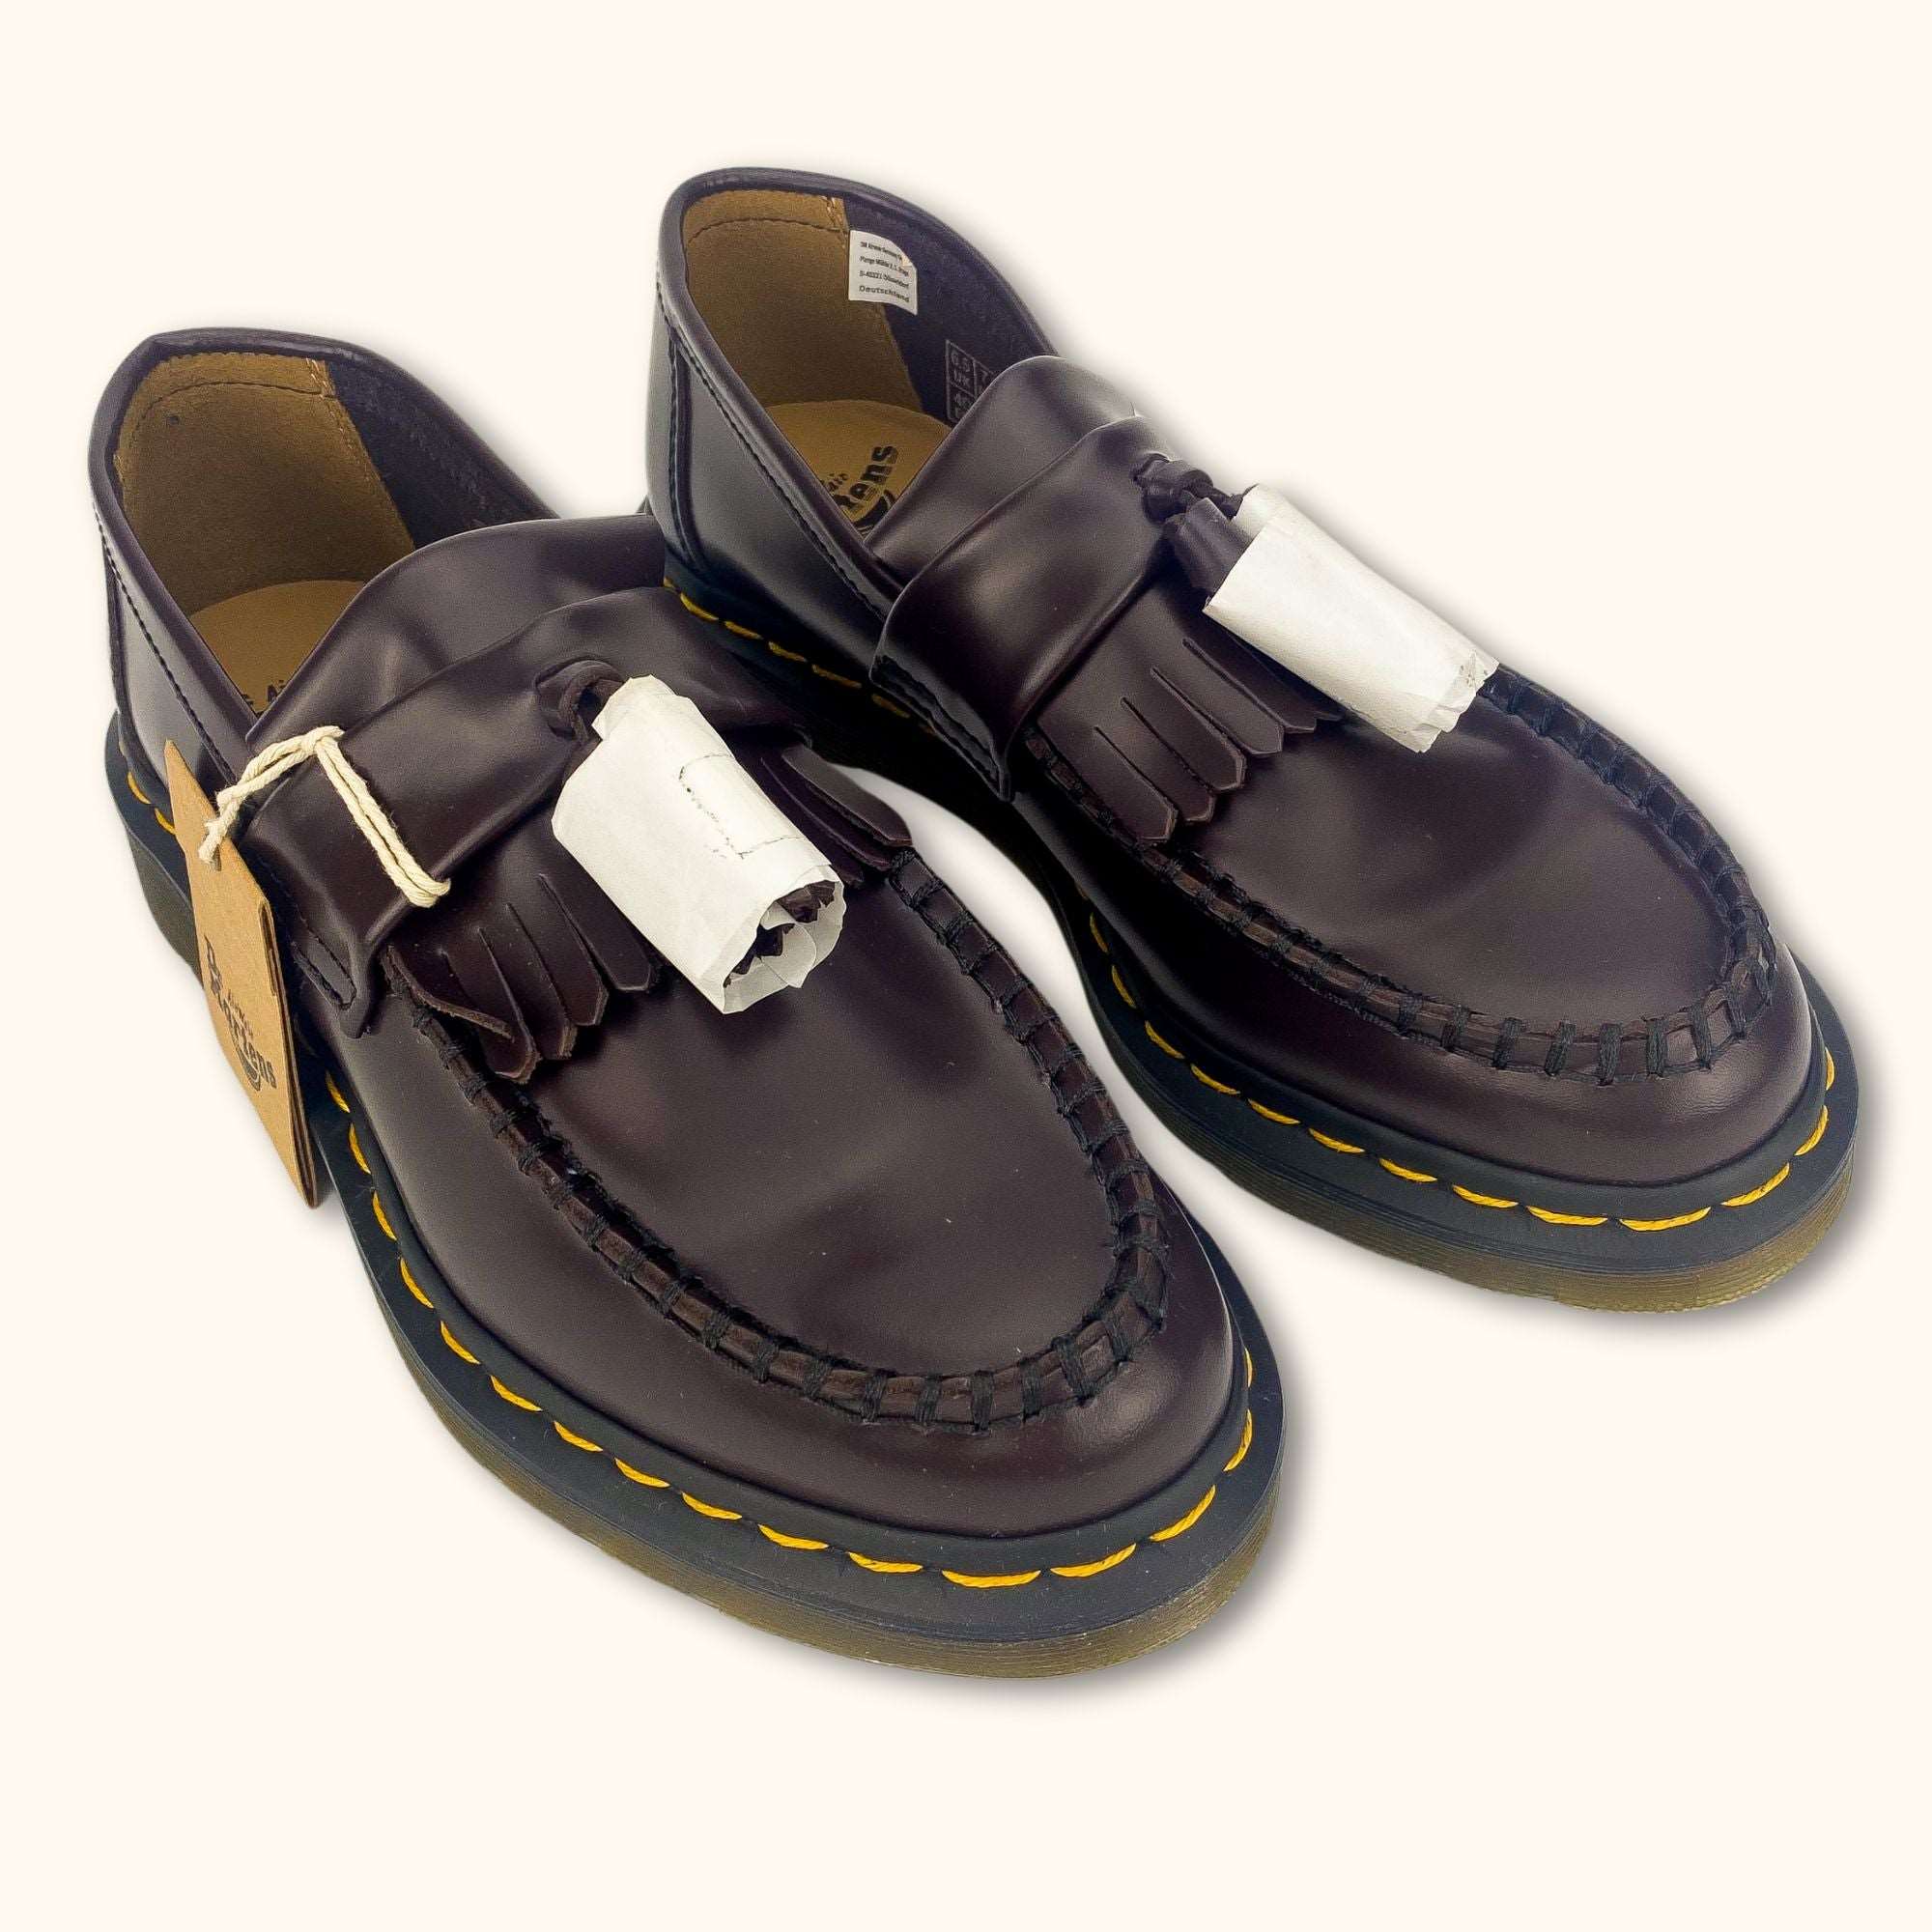 Dr. Martens Adrian Smooth Leather Tassel Loafers Burgundy - Size 6.5